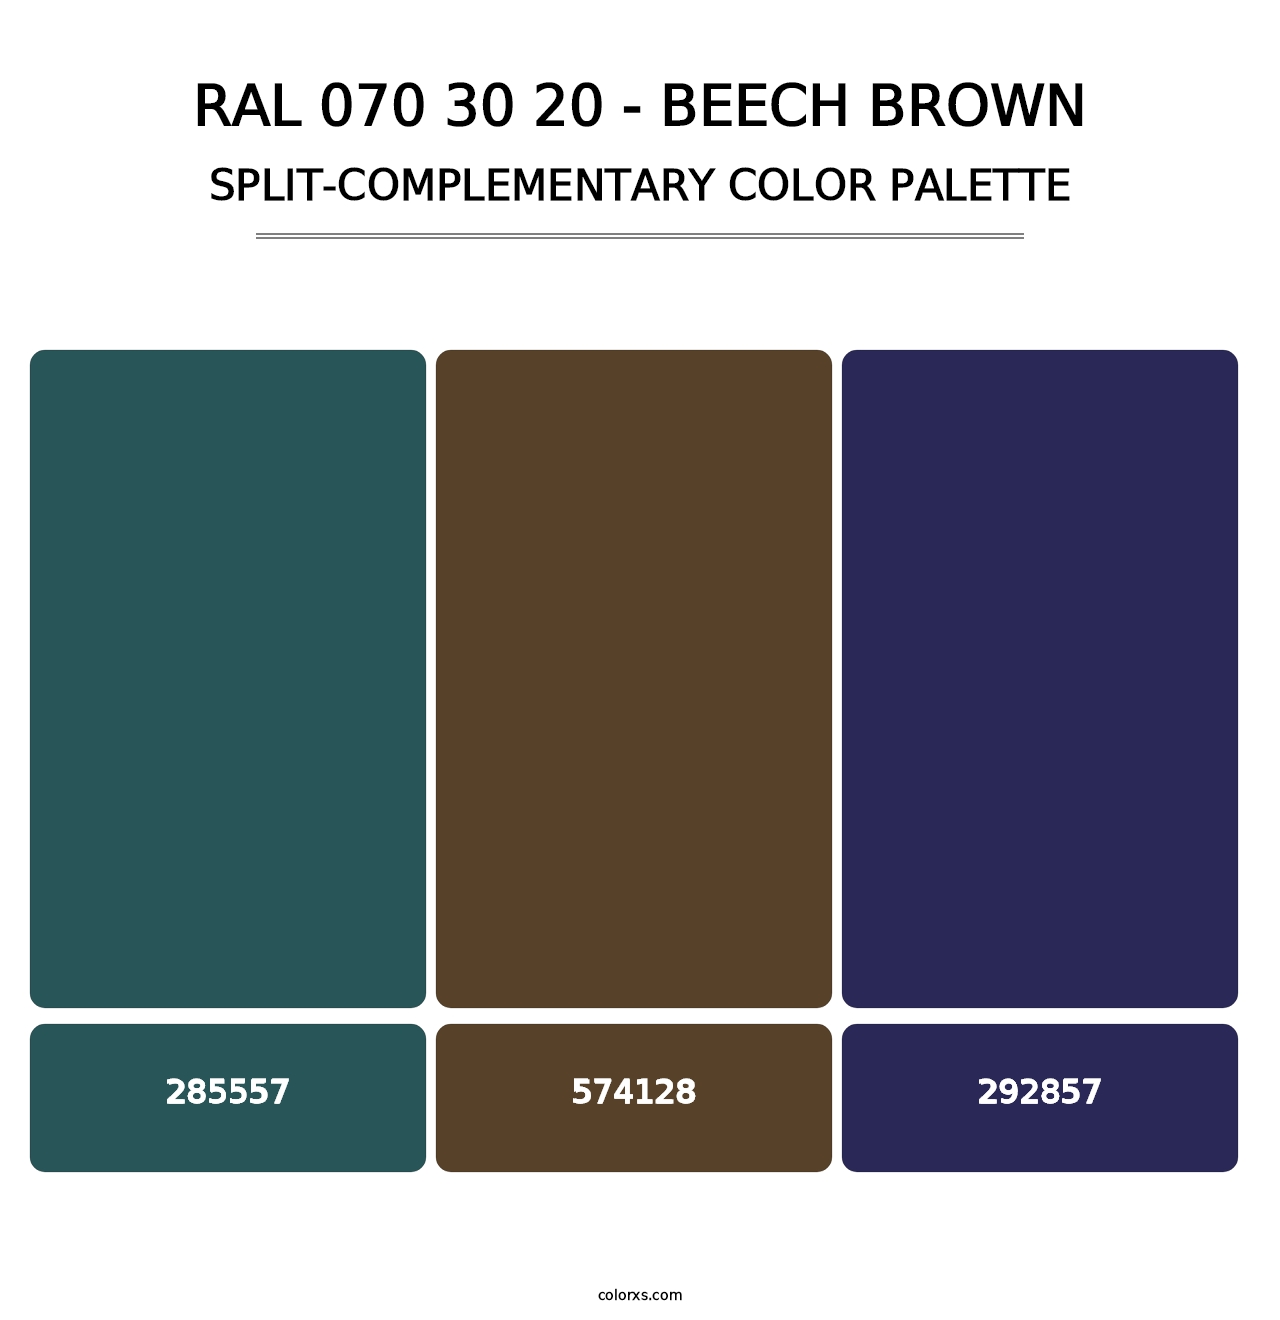 RAL 070 30 20 - Beech Brown - Split-Complementary Color Palette